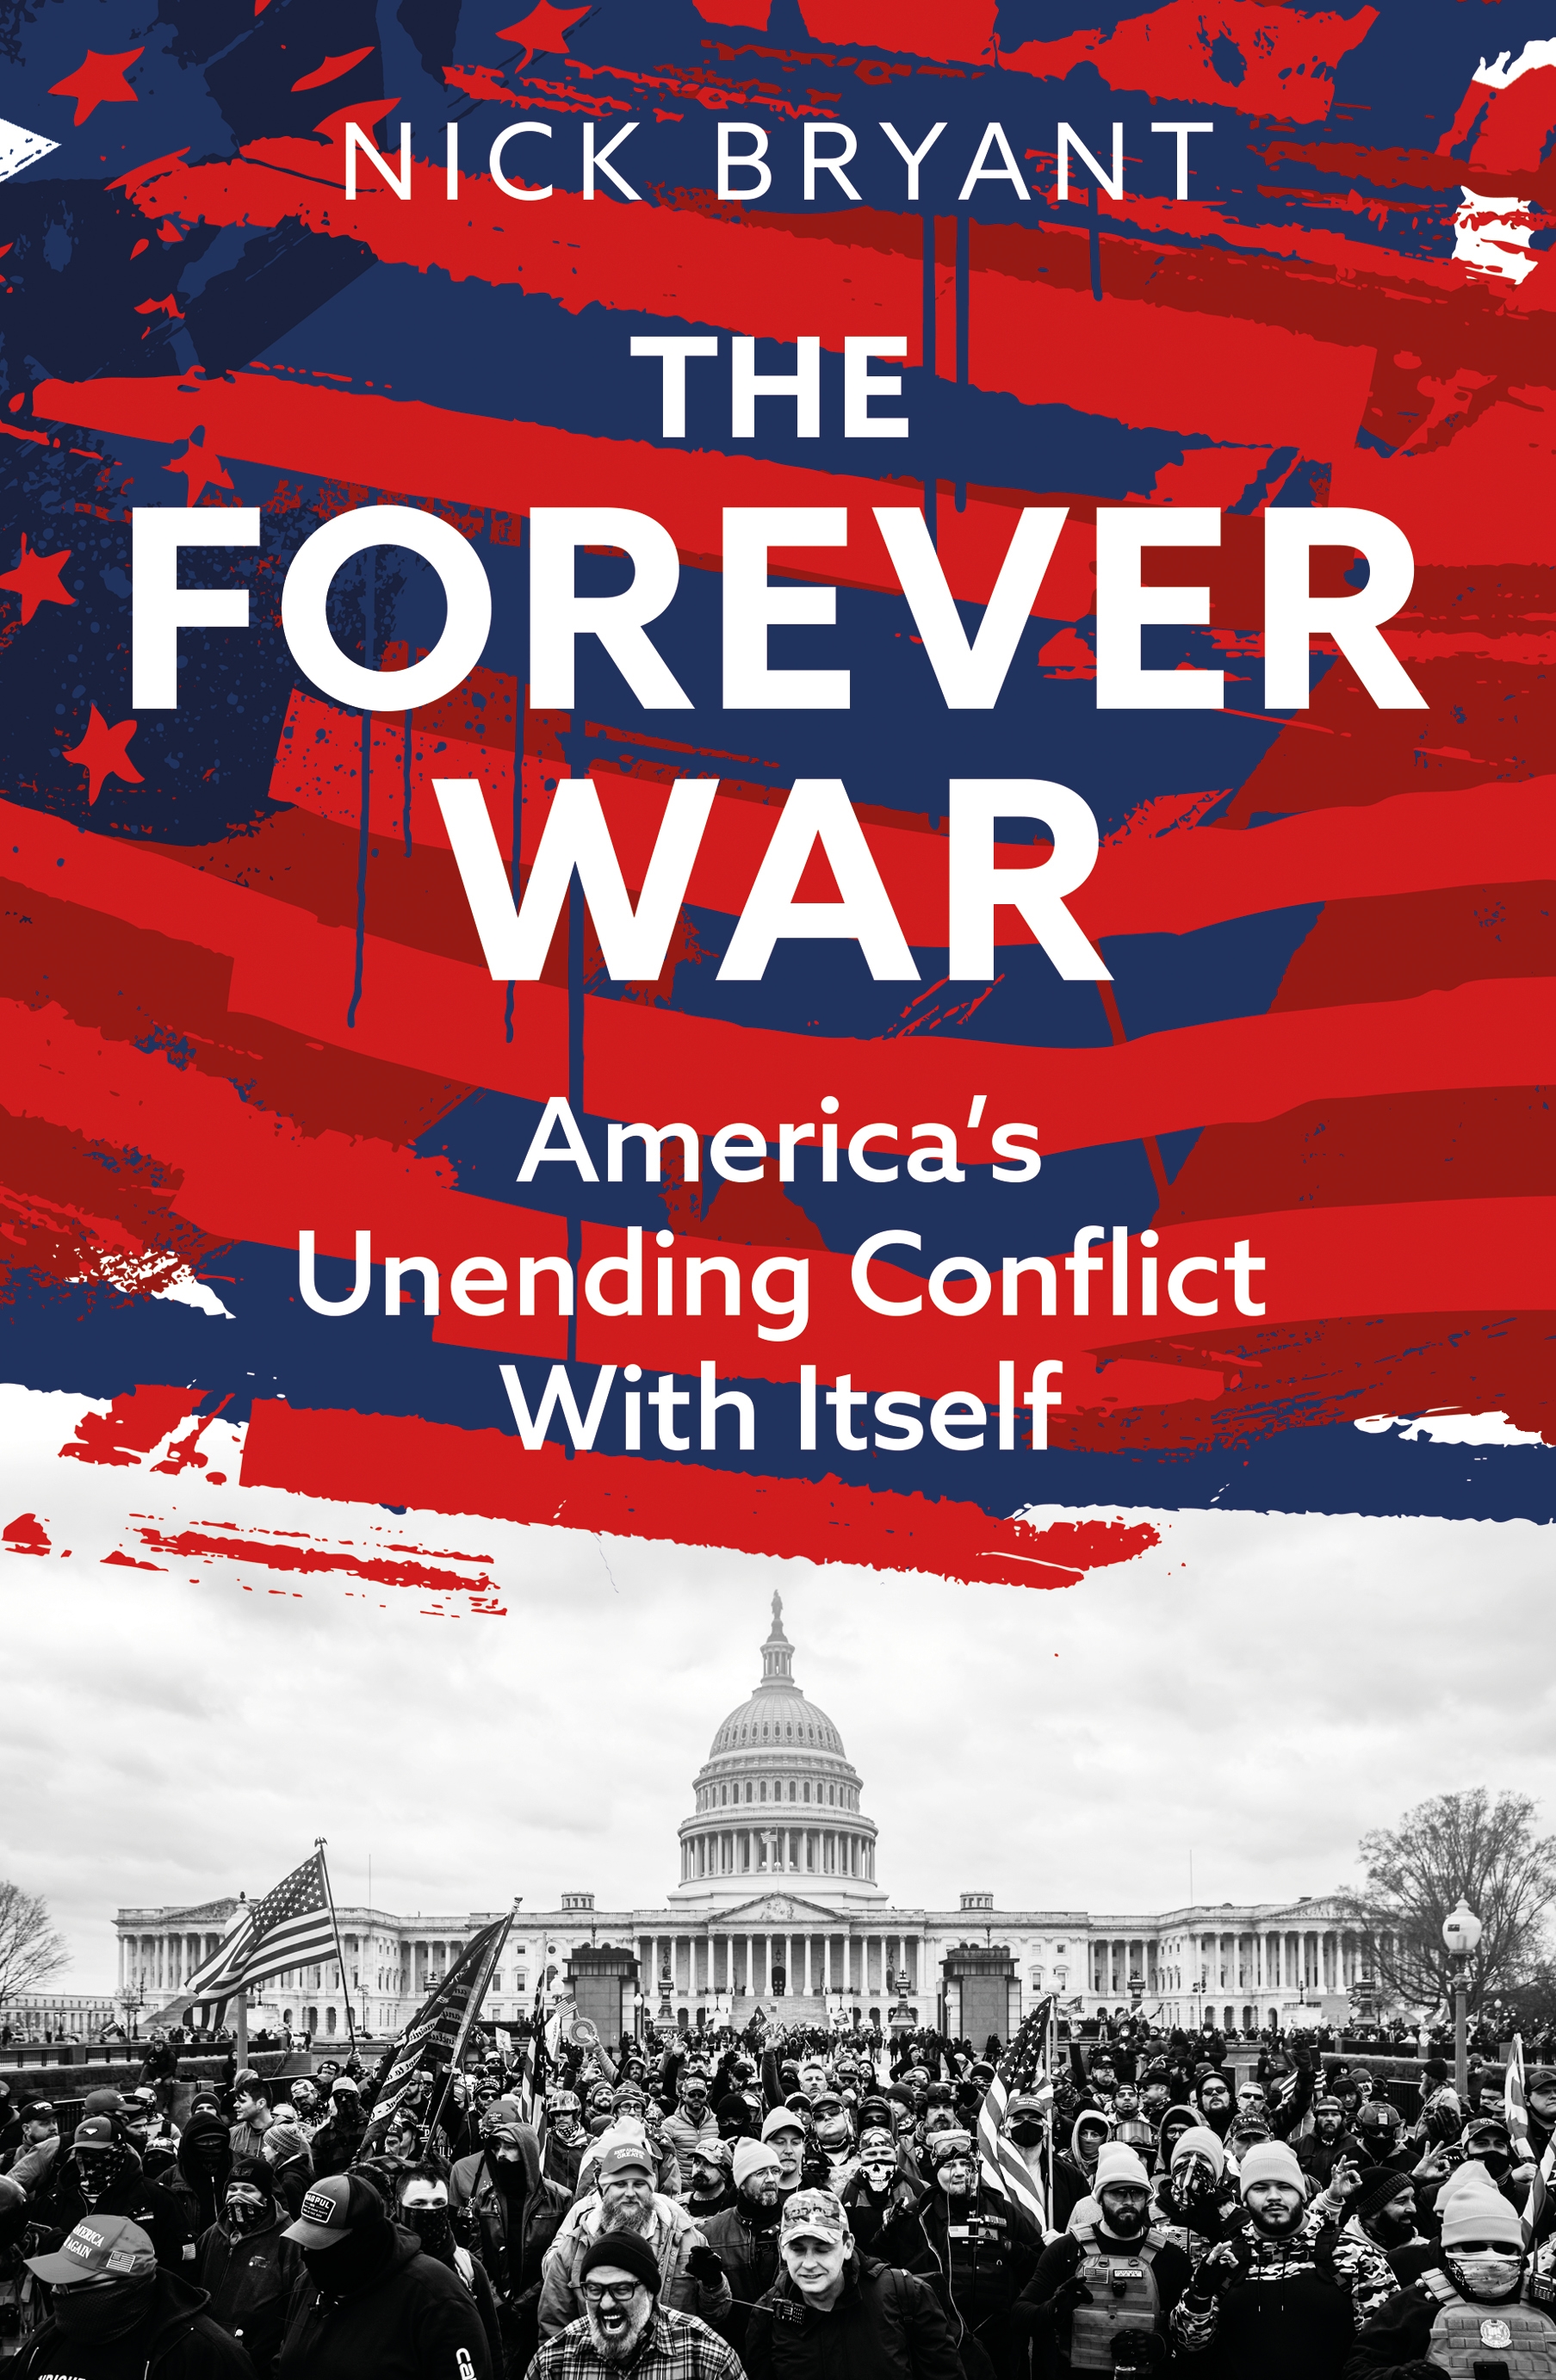 The Forever War: America’s Unending Conflict with Itself by Nick Bryant